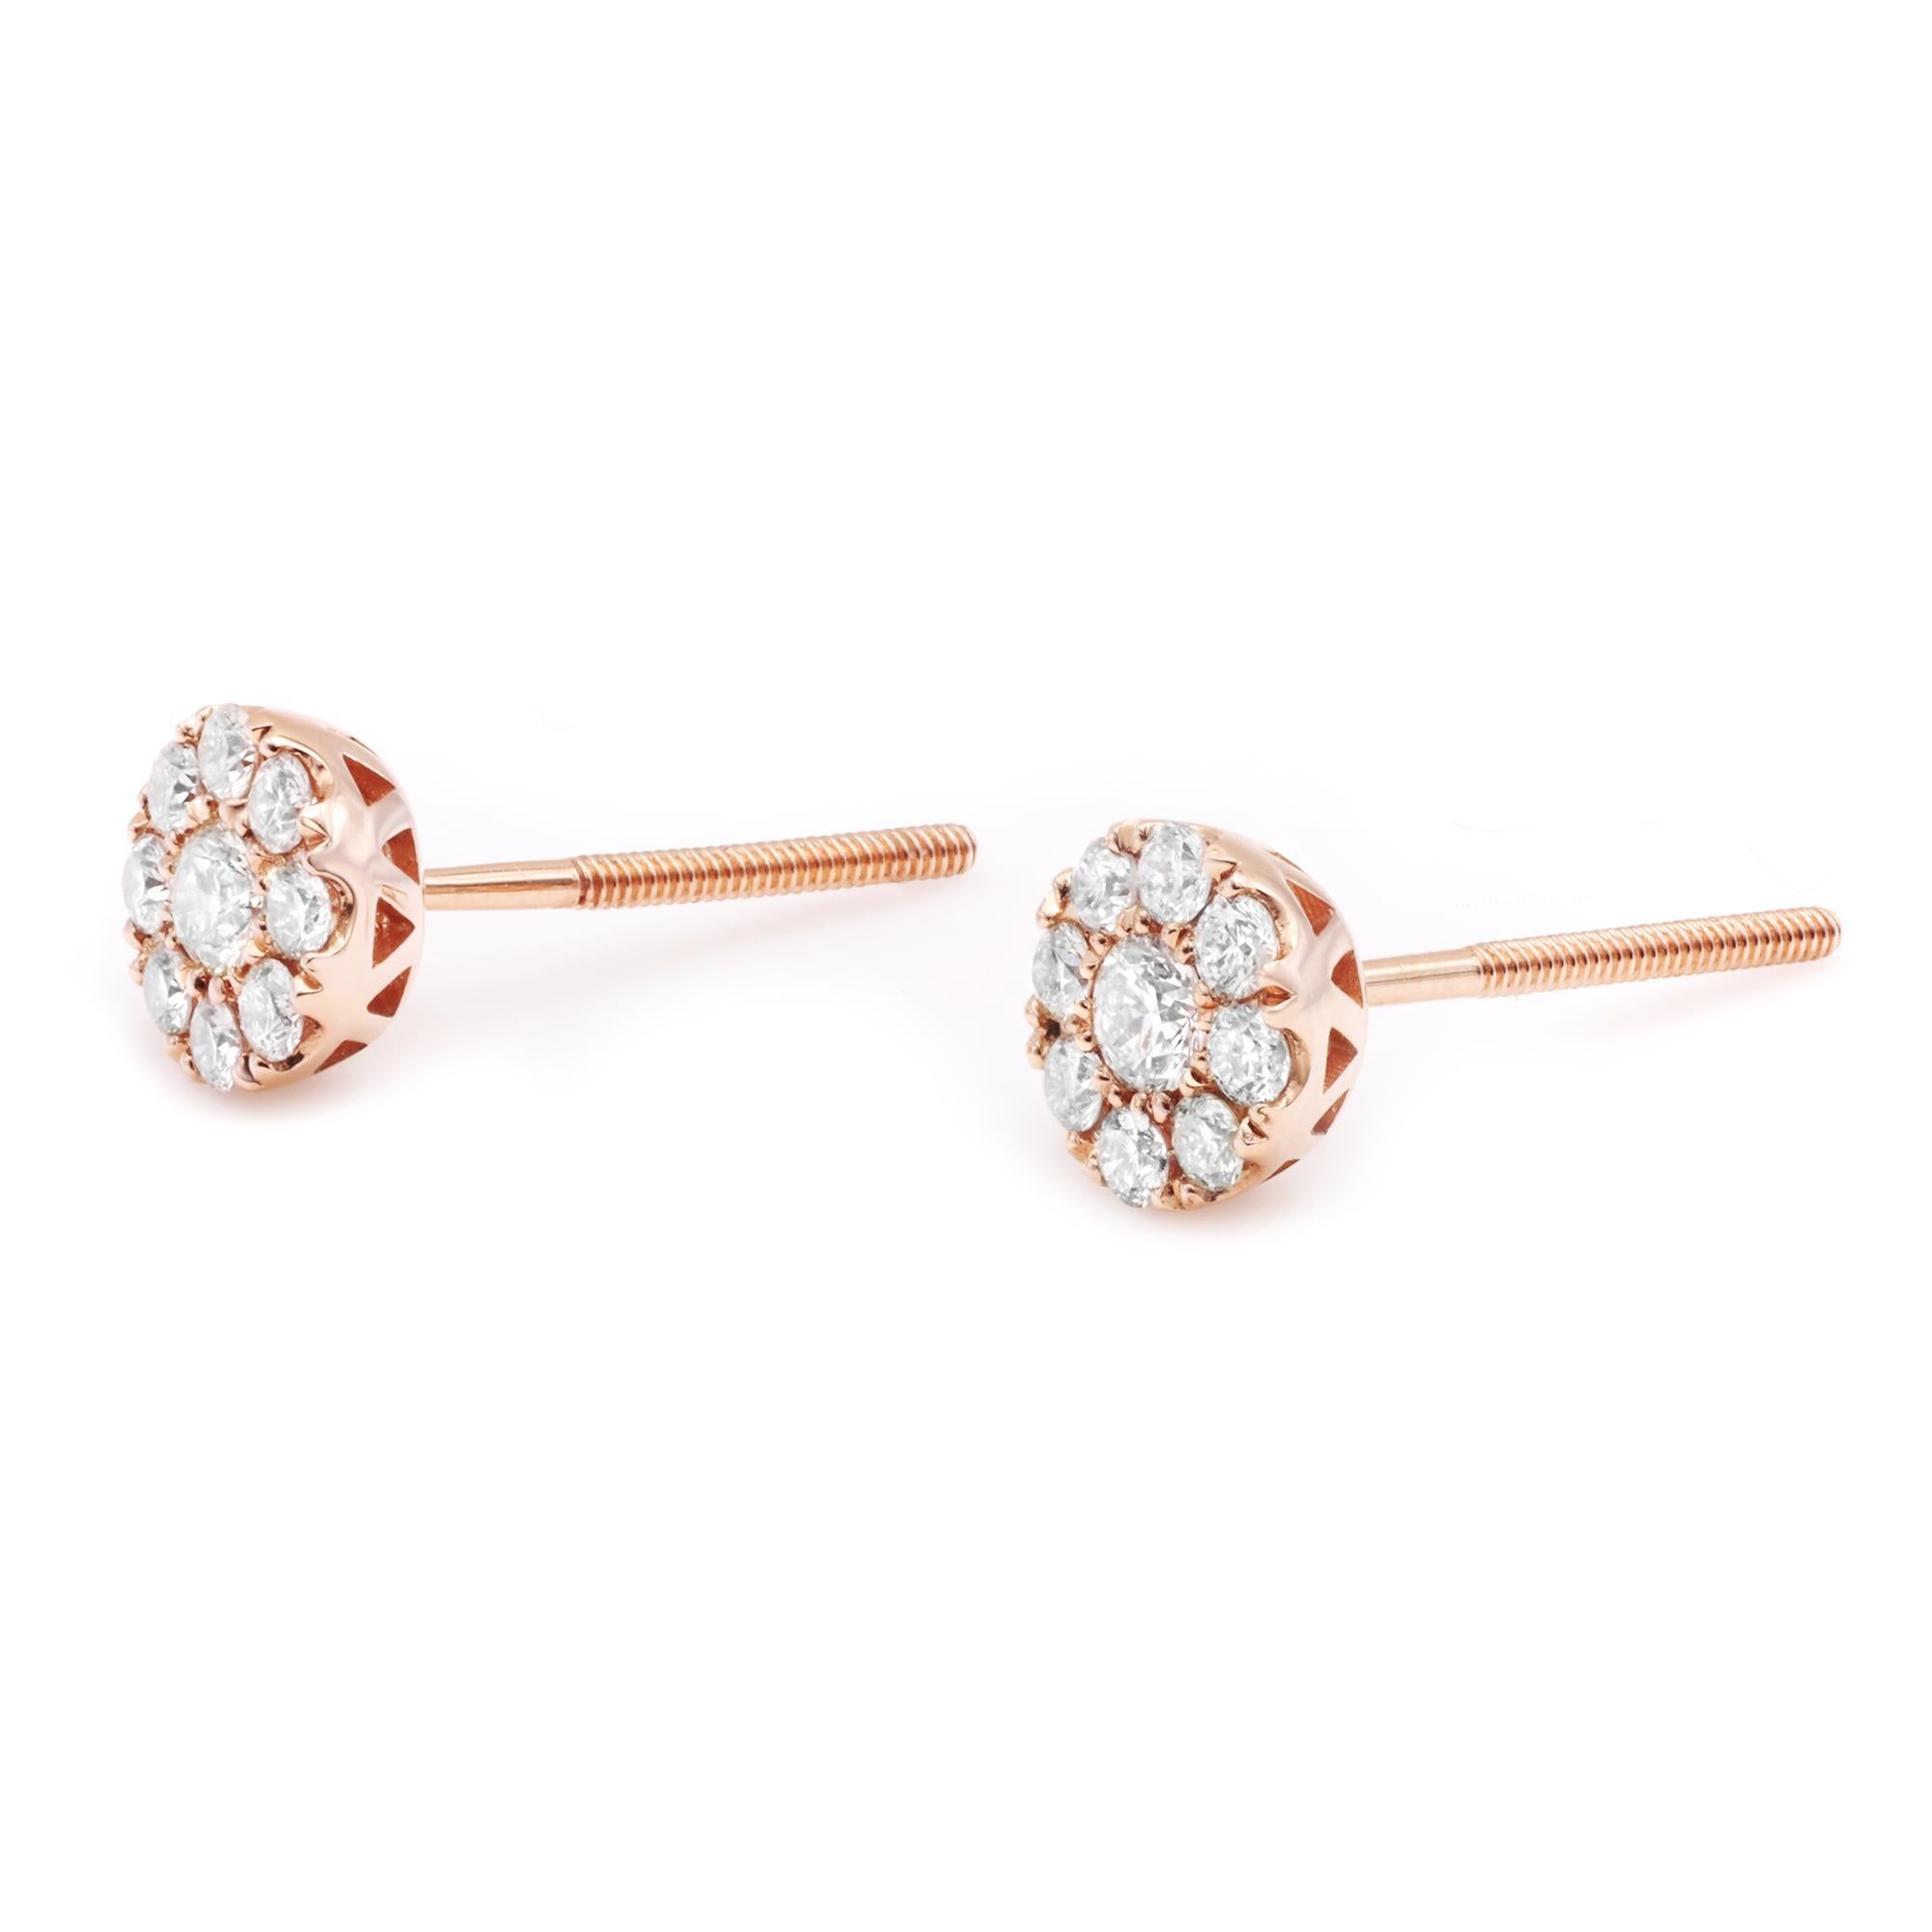 These delicate earrings feature natural dazzling diamond centers surrounded by a stunning halo of pave set diamonds. The setting allows the earring to sit flush with the ear for maximum comfort. Crafted in 14k rose gold. Total diamond carat weight: